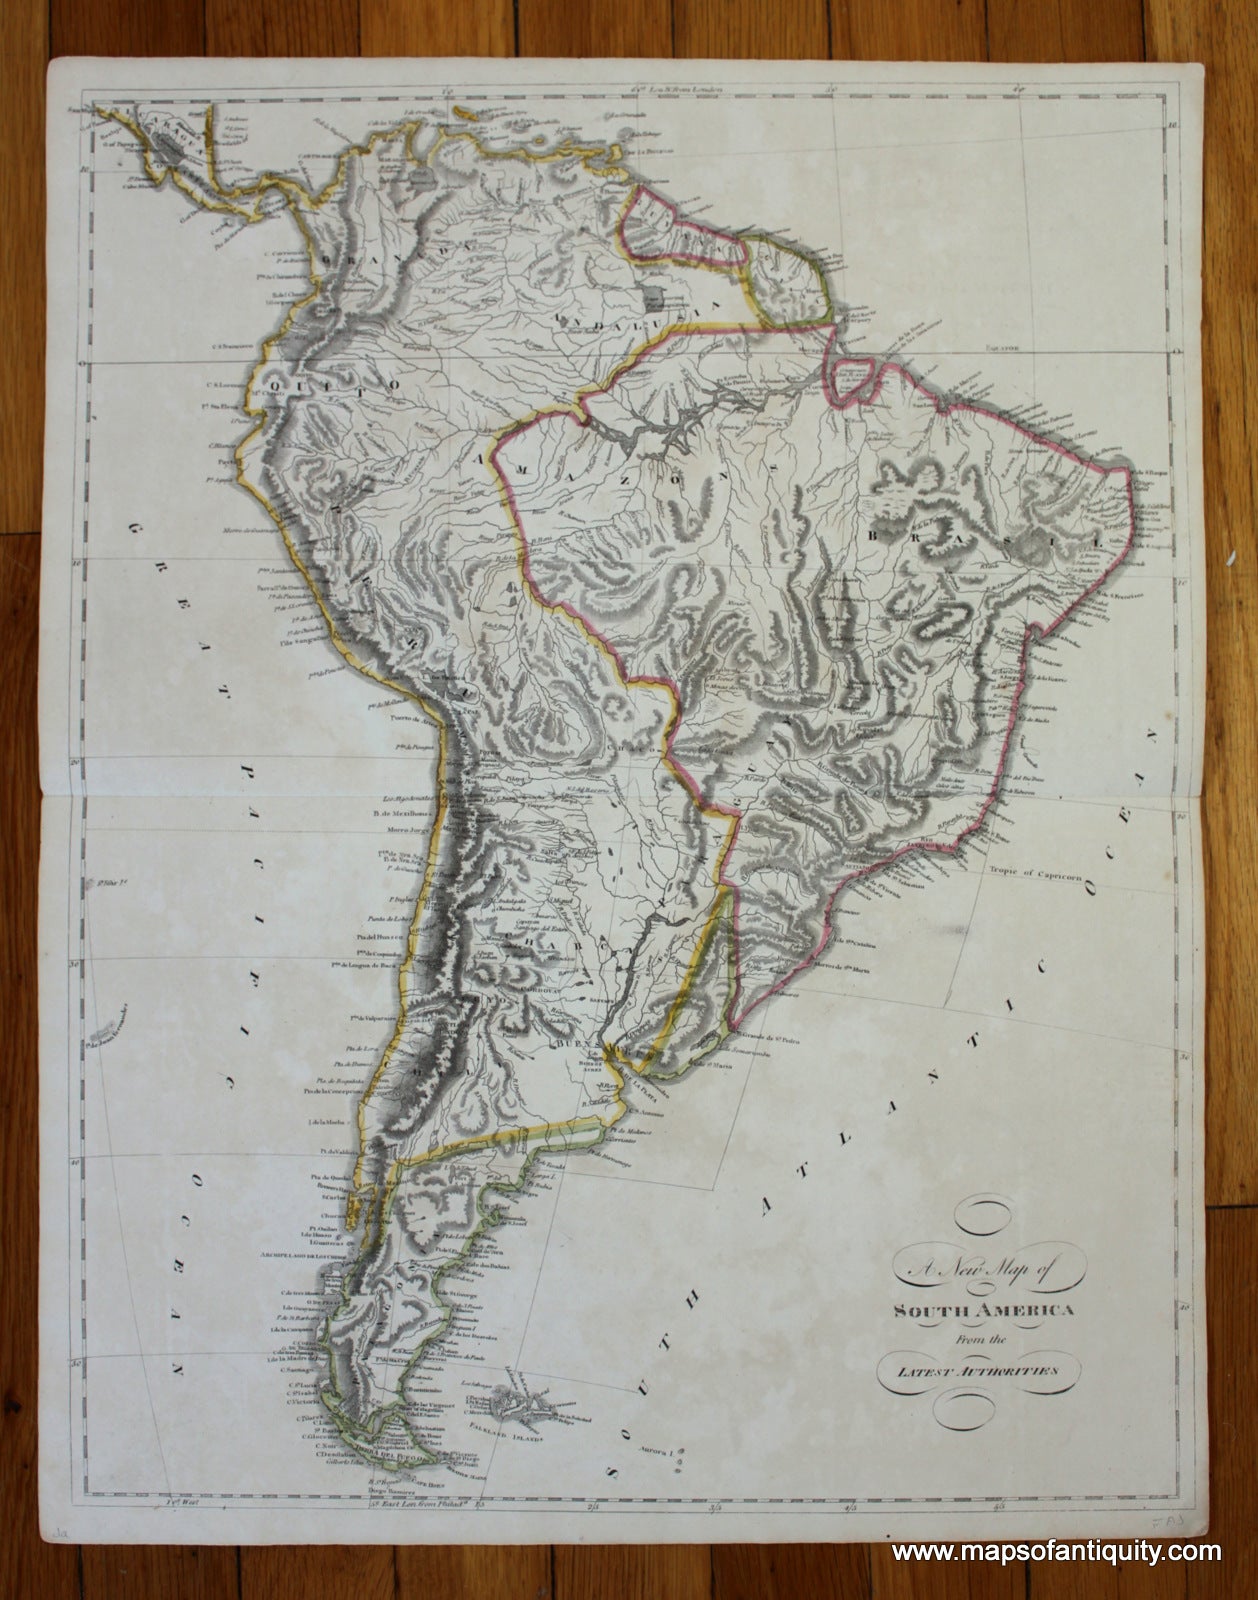 Antique-Hand-Colored-Map-A-New-Map-of-South-America-From-the-Latest-Authorities-South-America-South-America-General-1814-Carey-Maps-Of-Antiquity